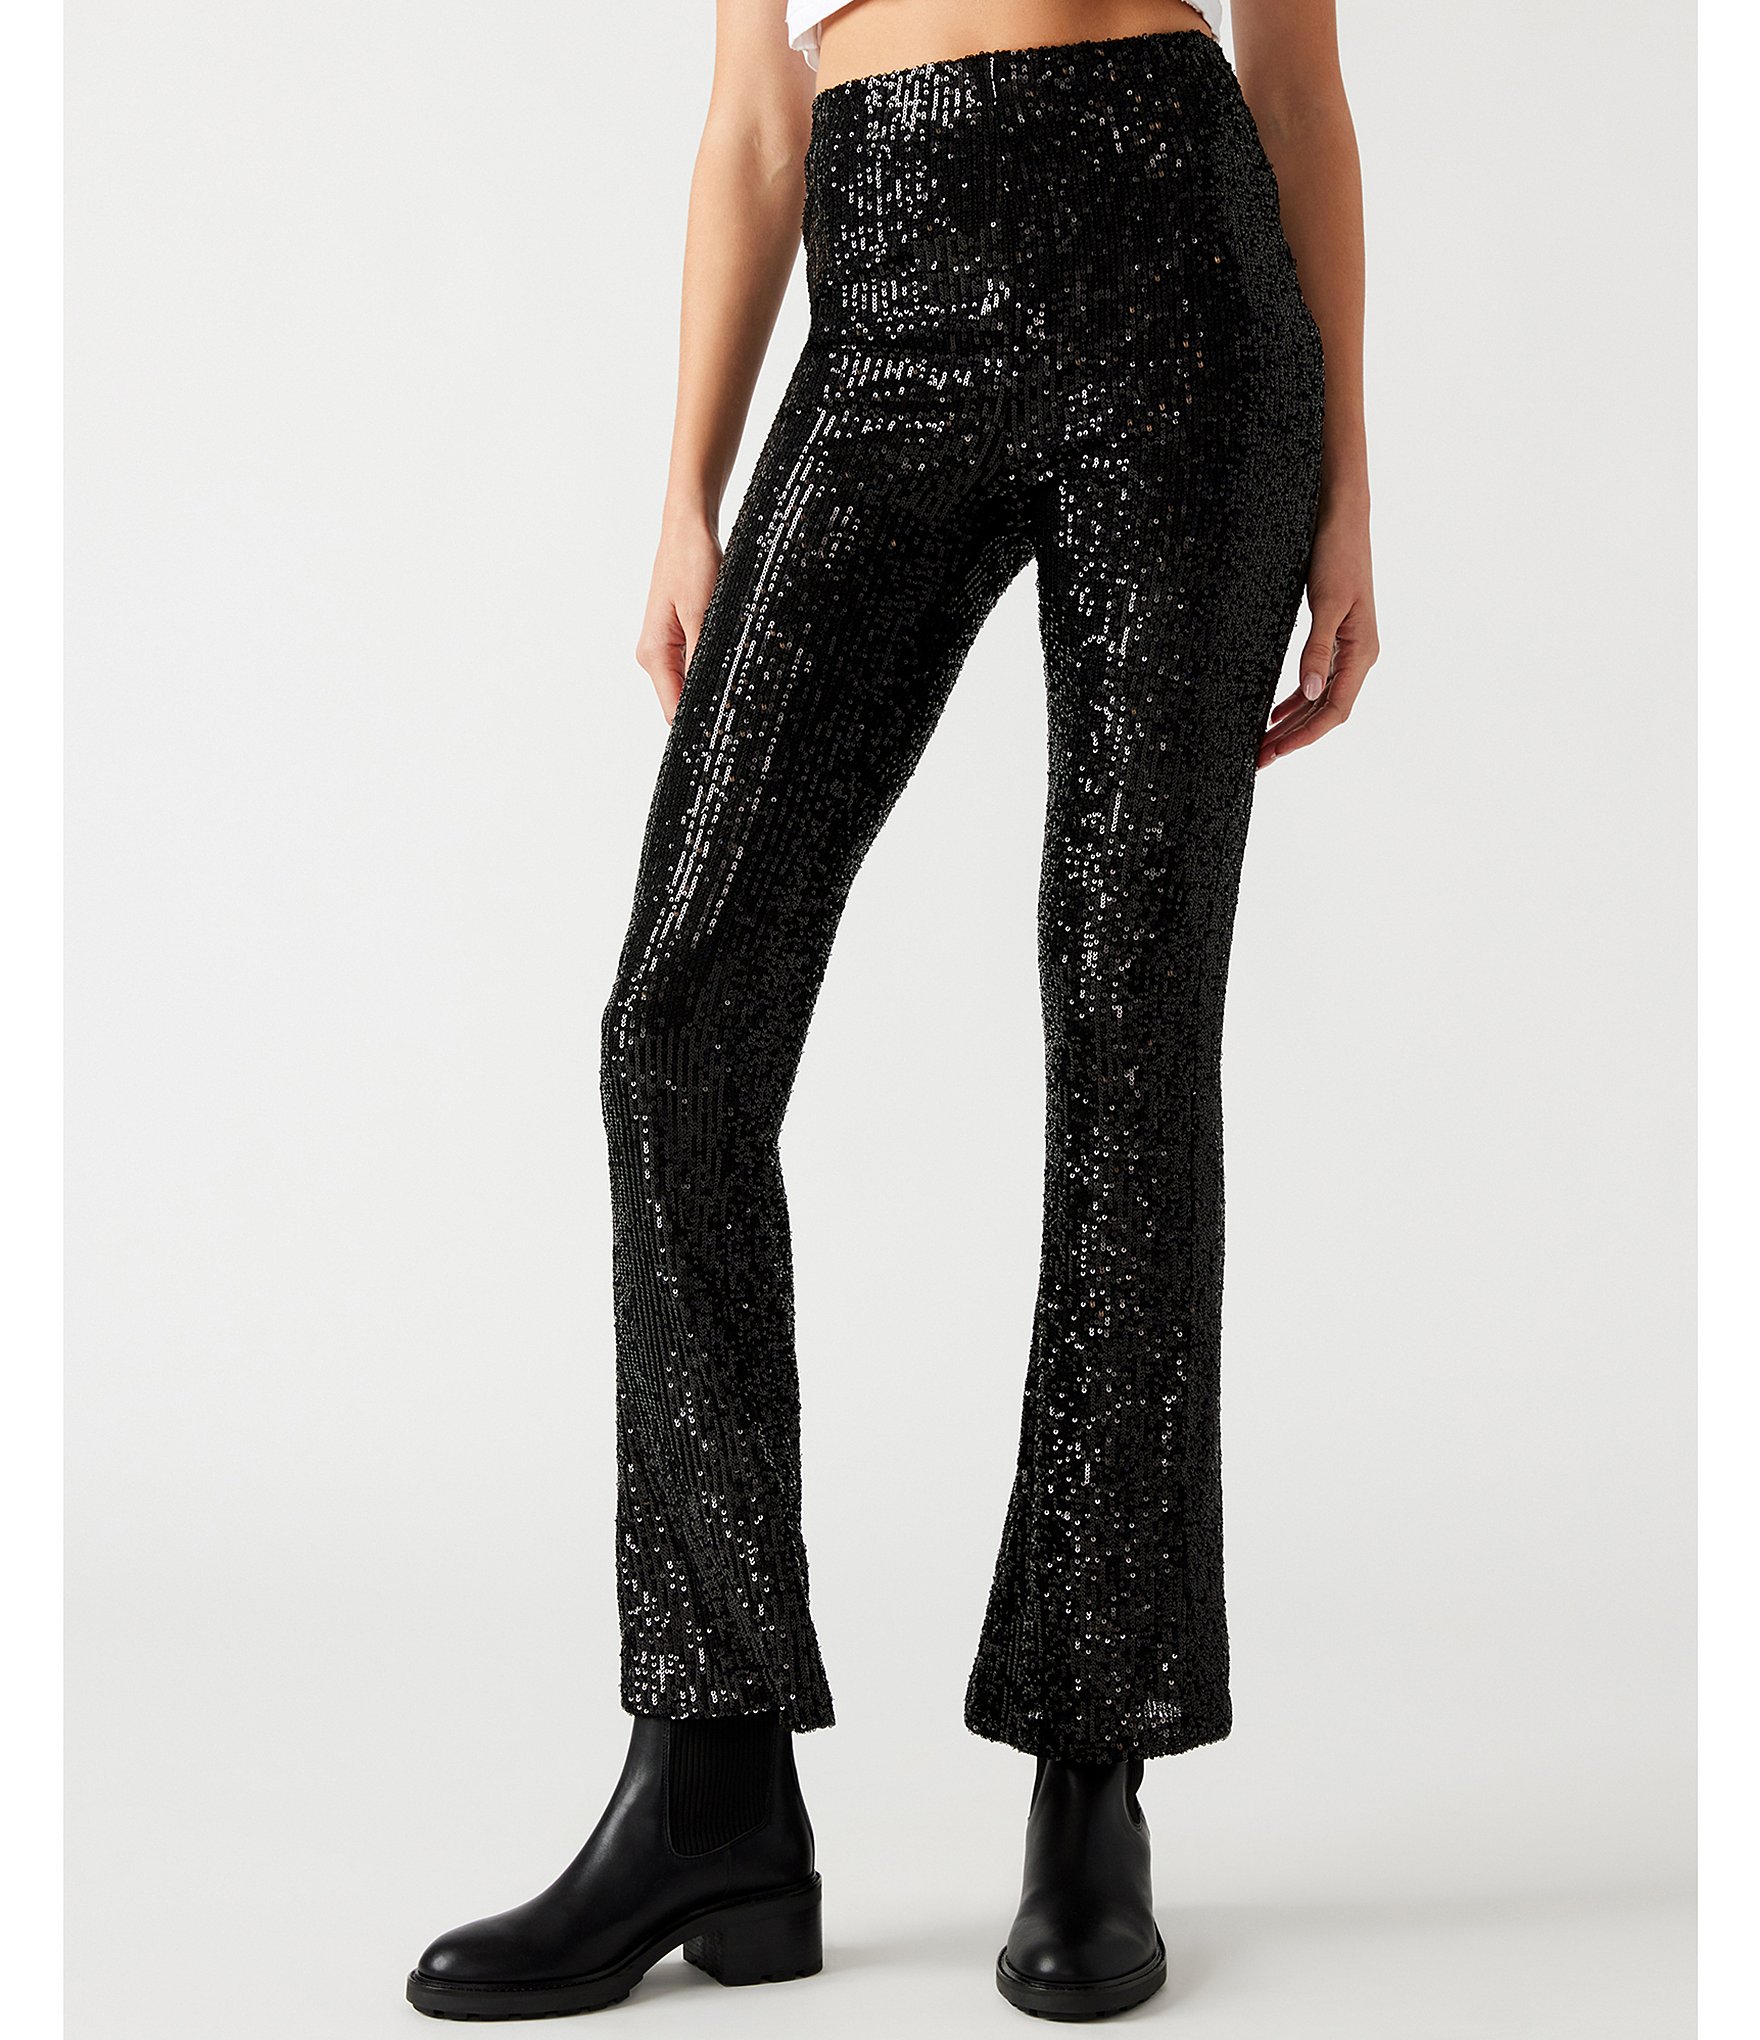 How To Wear: Sequin Leggings – Broke and Beautiful